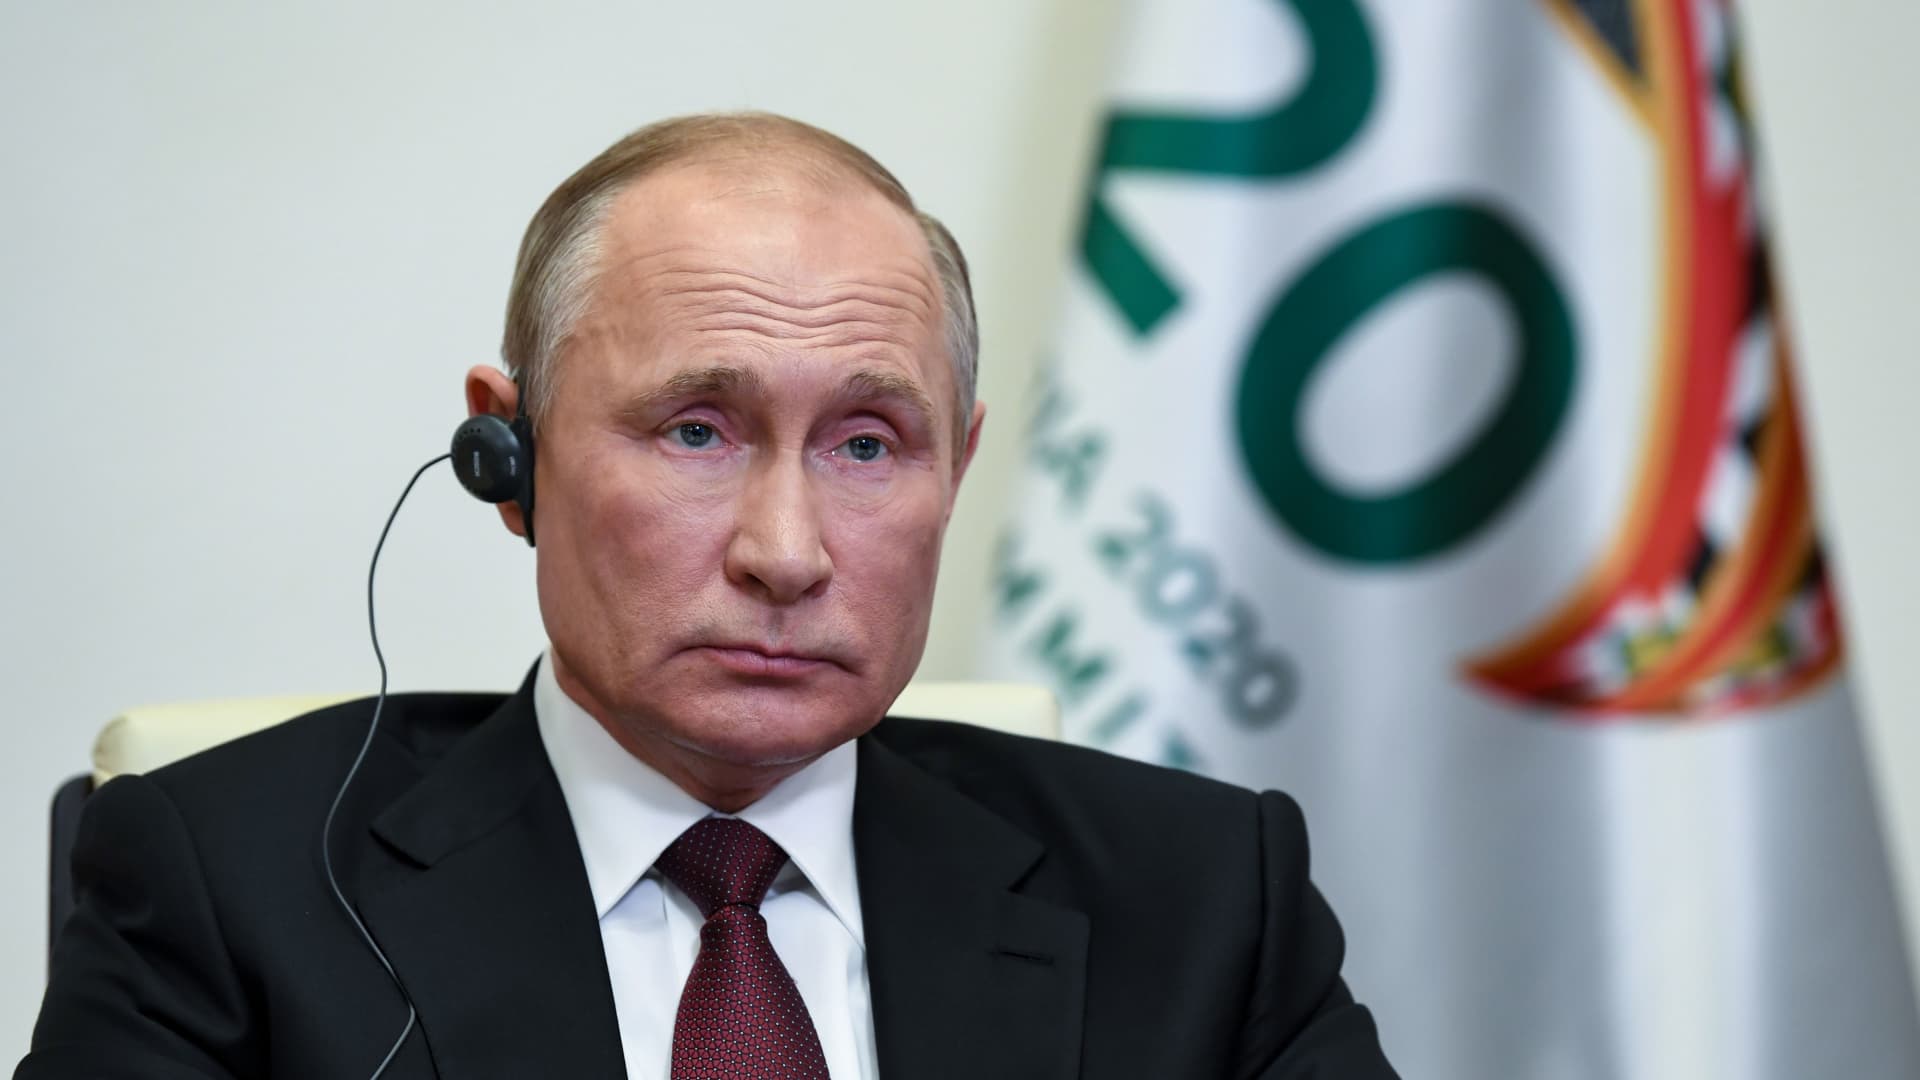 Russian President Vladimir Putin attends the G20 summit hosted by Saudi Arabia via video conference at the Novo-Ogaryovo state residence, outside Moscow, Russia, on November 21, 2020.